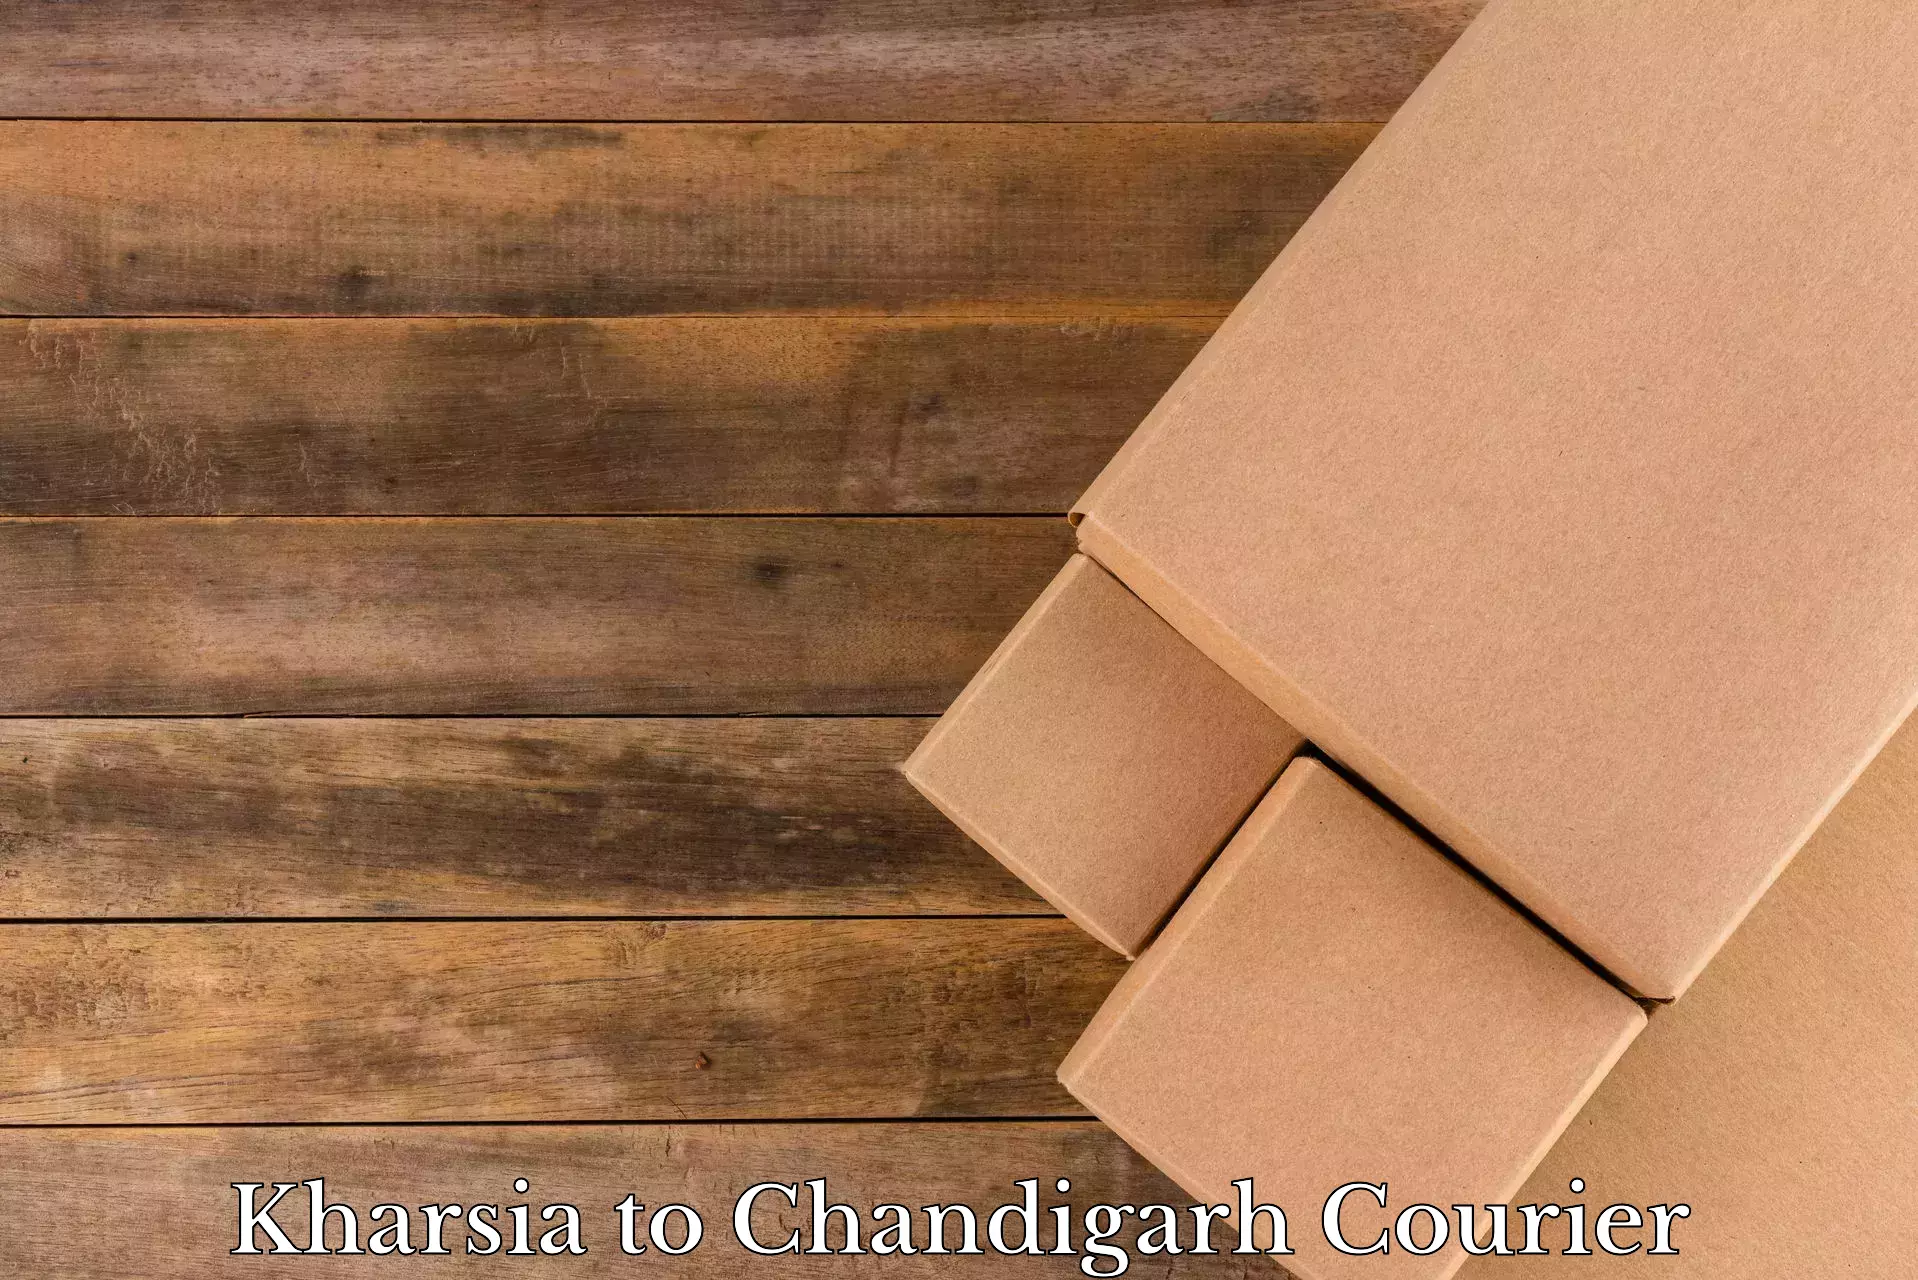 Affordable relocation services in Kharsia to Chandigarh